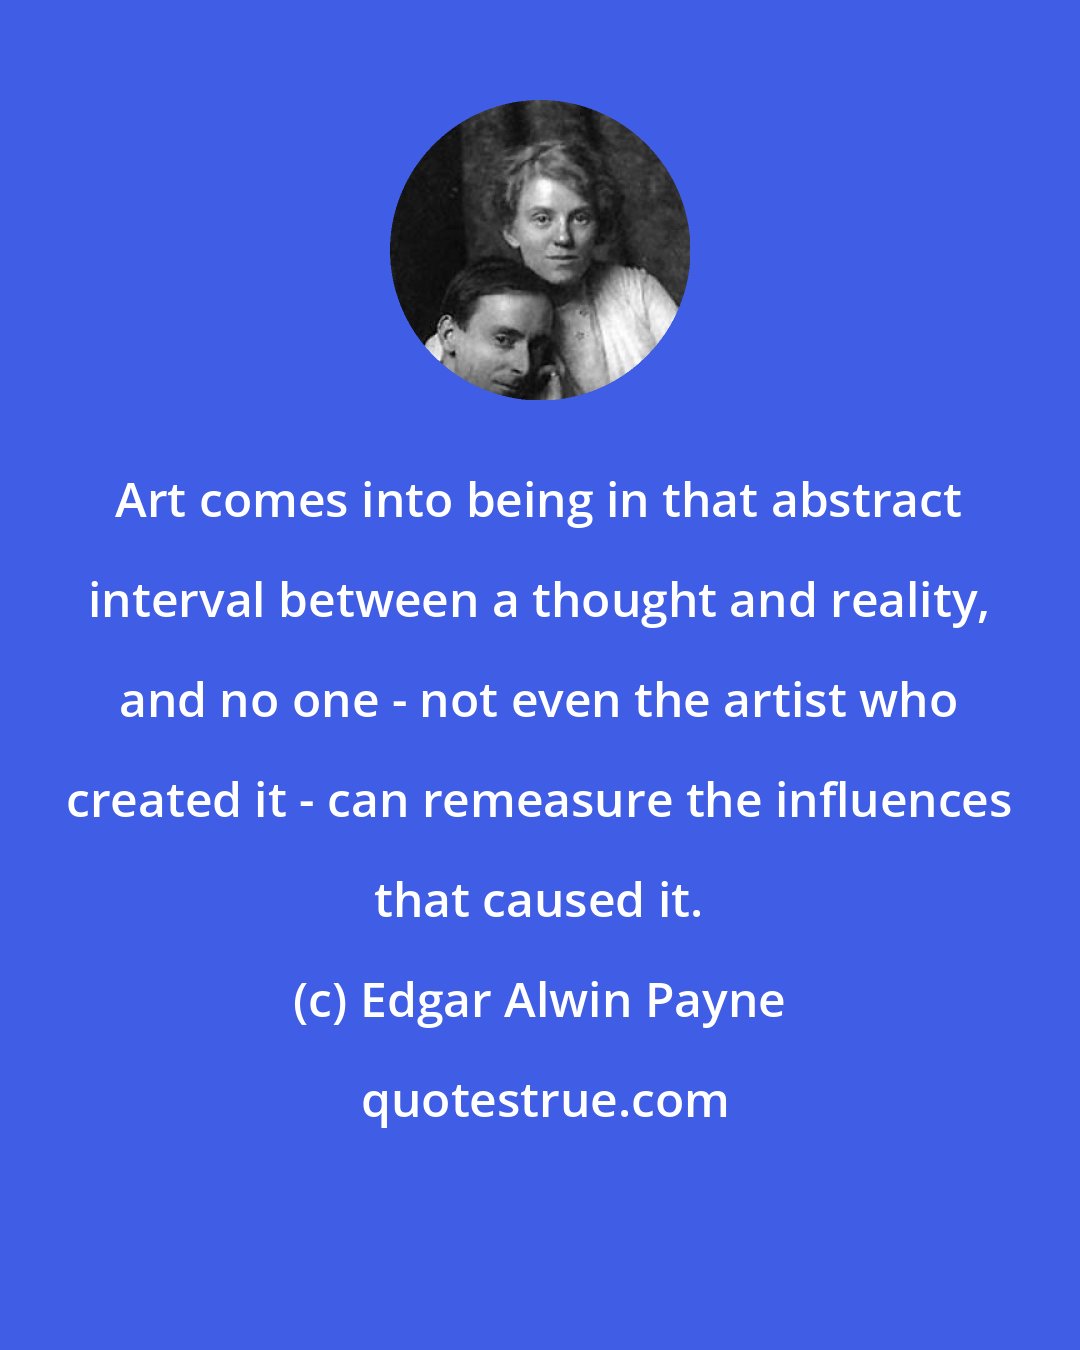 Edgar Alwin Payne: Art comes into being in that abstract interval between a thought and reality, and no one - not even the artist who created it - can remeasure the influences that caused it.